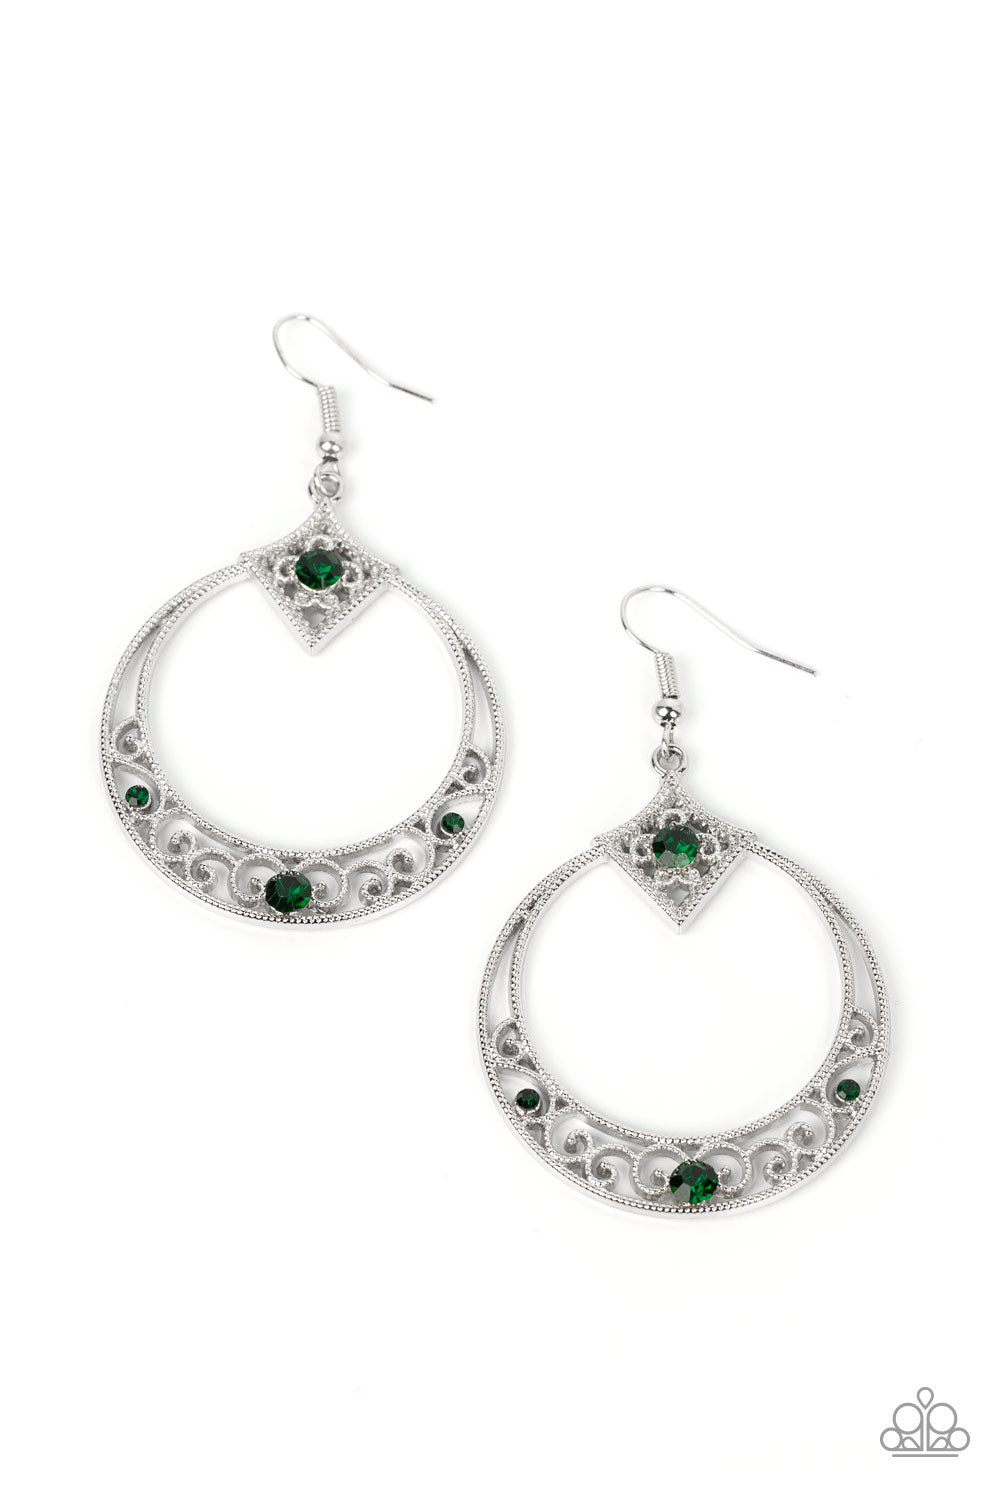 Royal Resort - Green and Silver Earrings - Paparazzi Accessories - Studded silver filigree swirls inside the bottom of a shiny silver hoop that is crowned in a diamond-shaped frame. Glittery green rhinestones are sprinkled along the vine-like motifs, adding a glitzy finish to the seasonal inspired frame. Earring attaches to a standard fishhook fitting. Sold as one pair of earrings.